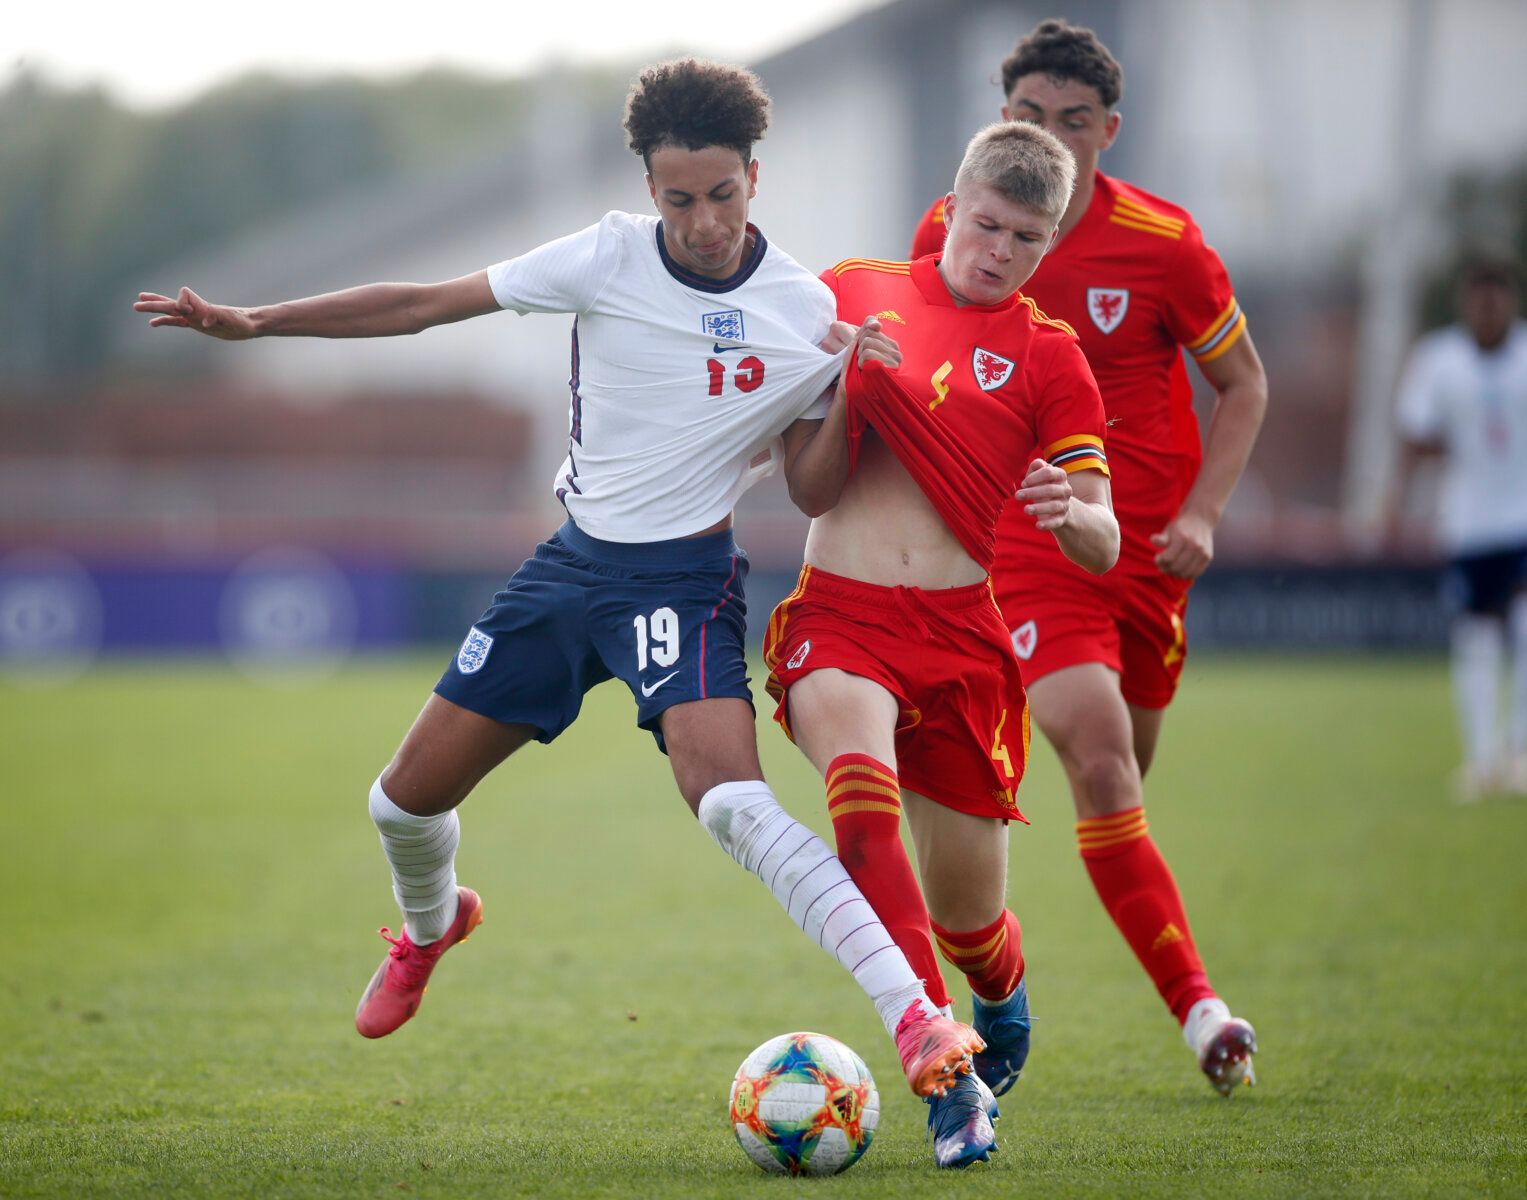 Soccer Football - Under 18 International Friendly - Wales v England - Spytty Park, Newport, Wales Britain - September 3, 2021 Wales' Jordan James in action with England's Kaide Gordon Action Images/Matthew Childs